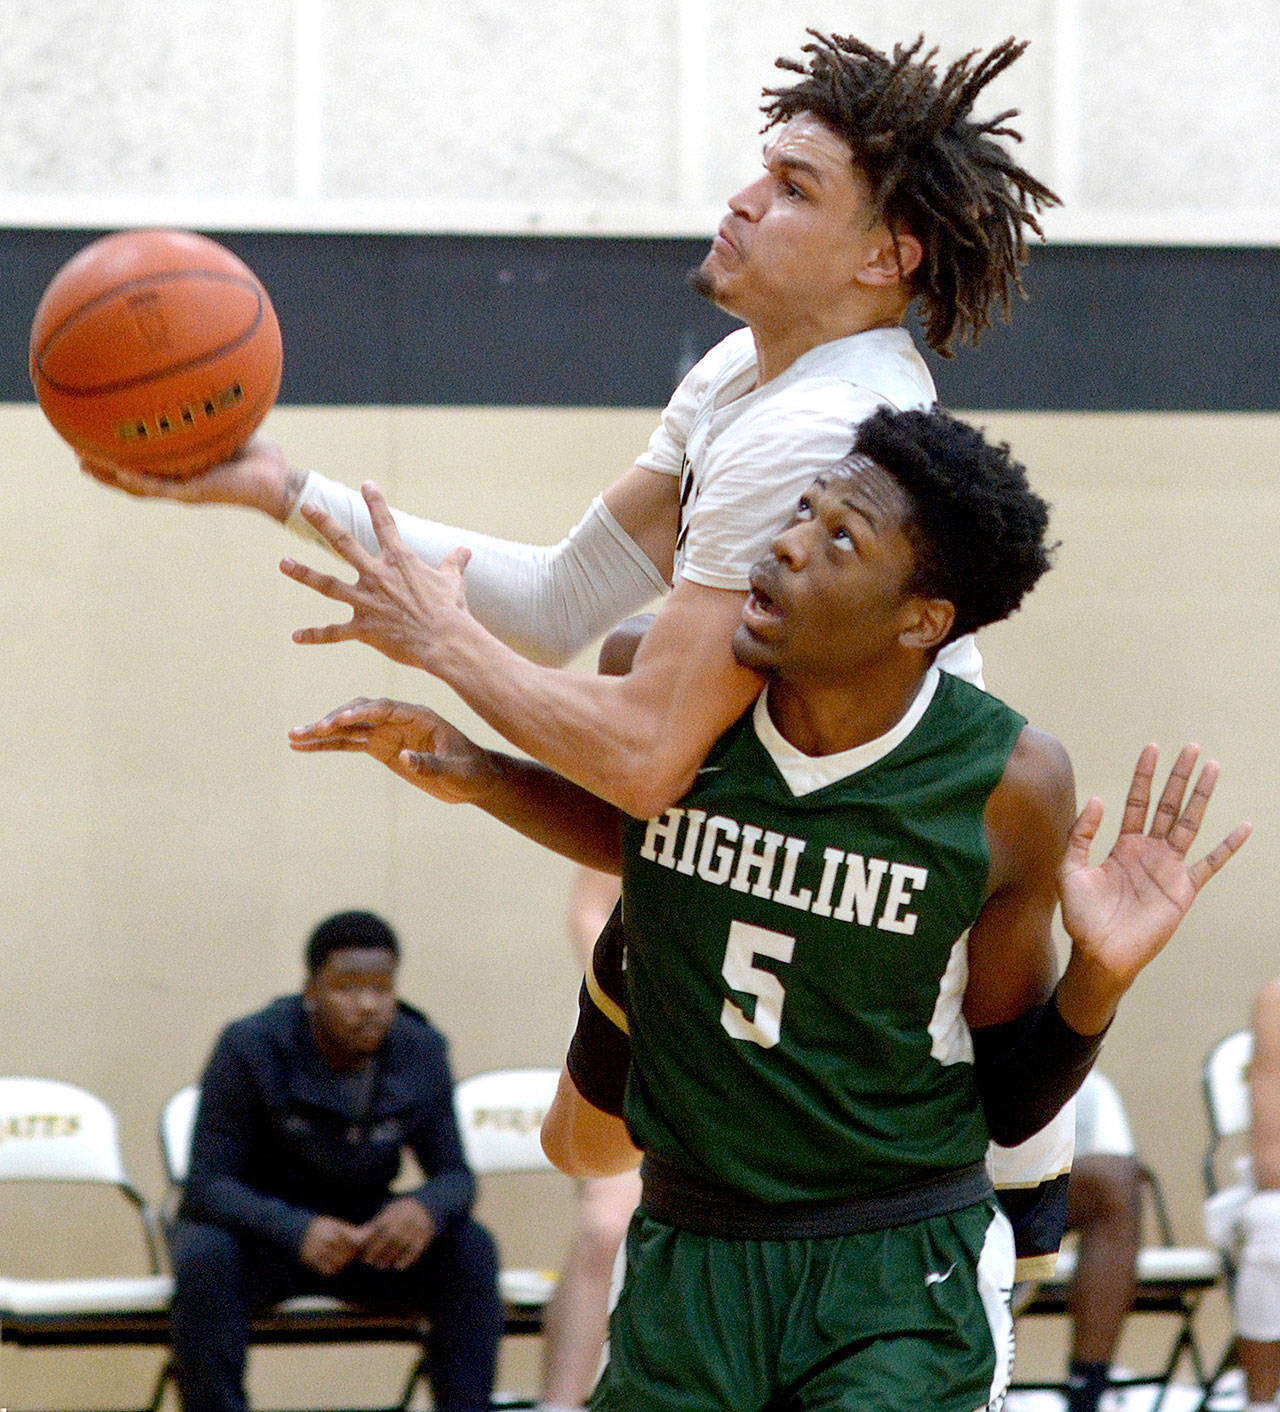 Peninsula’s Jaylin Reed goes up for a shot against Highline on Saturday. Reed scored 18 points to lead the Pirates in a 75-61 win. (Peninsula College)